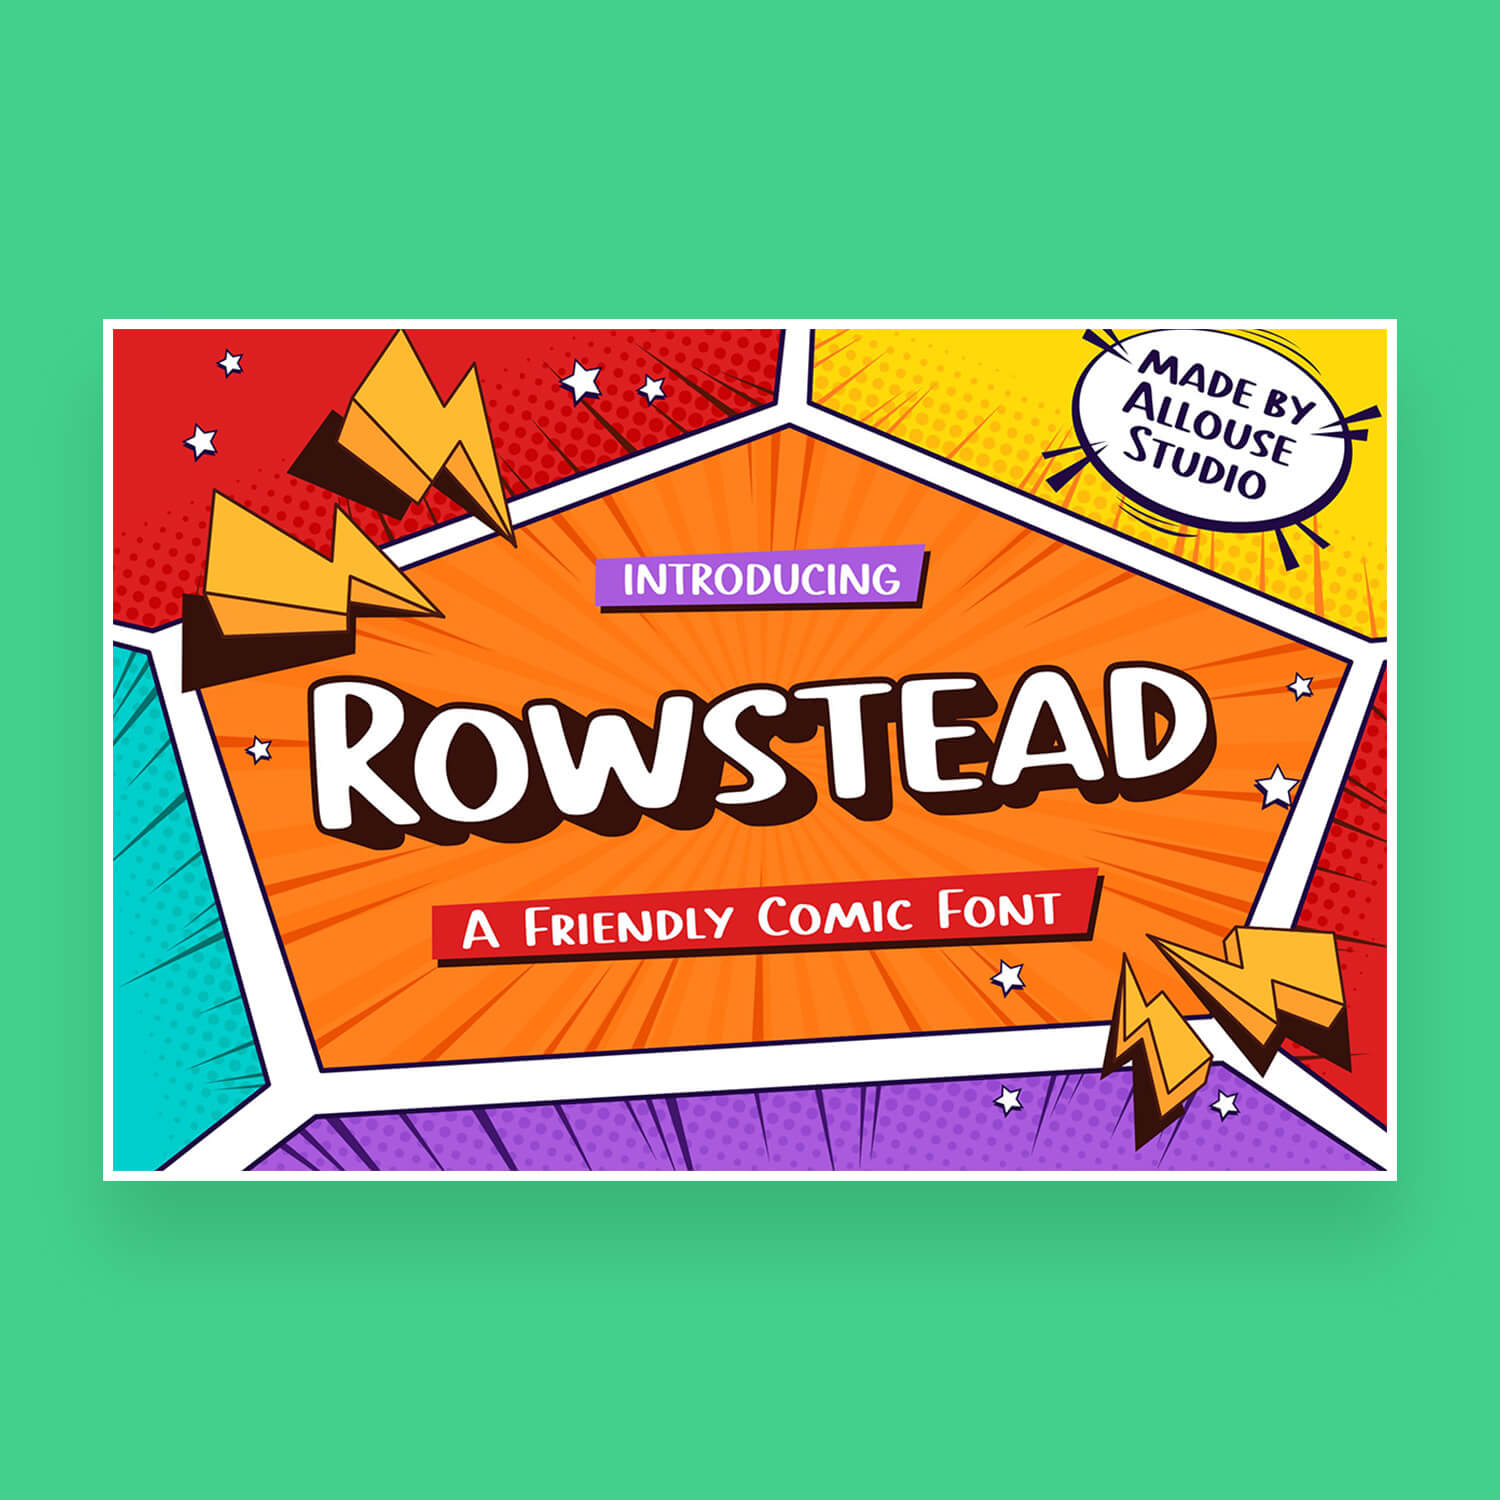 rowstead a friendly comic font cover image.